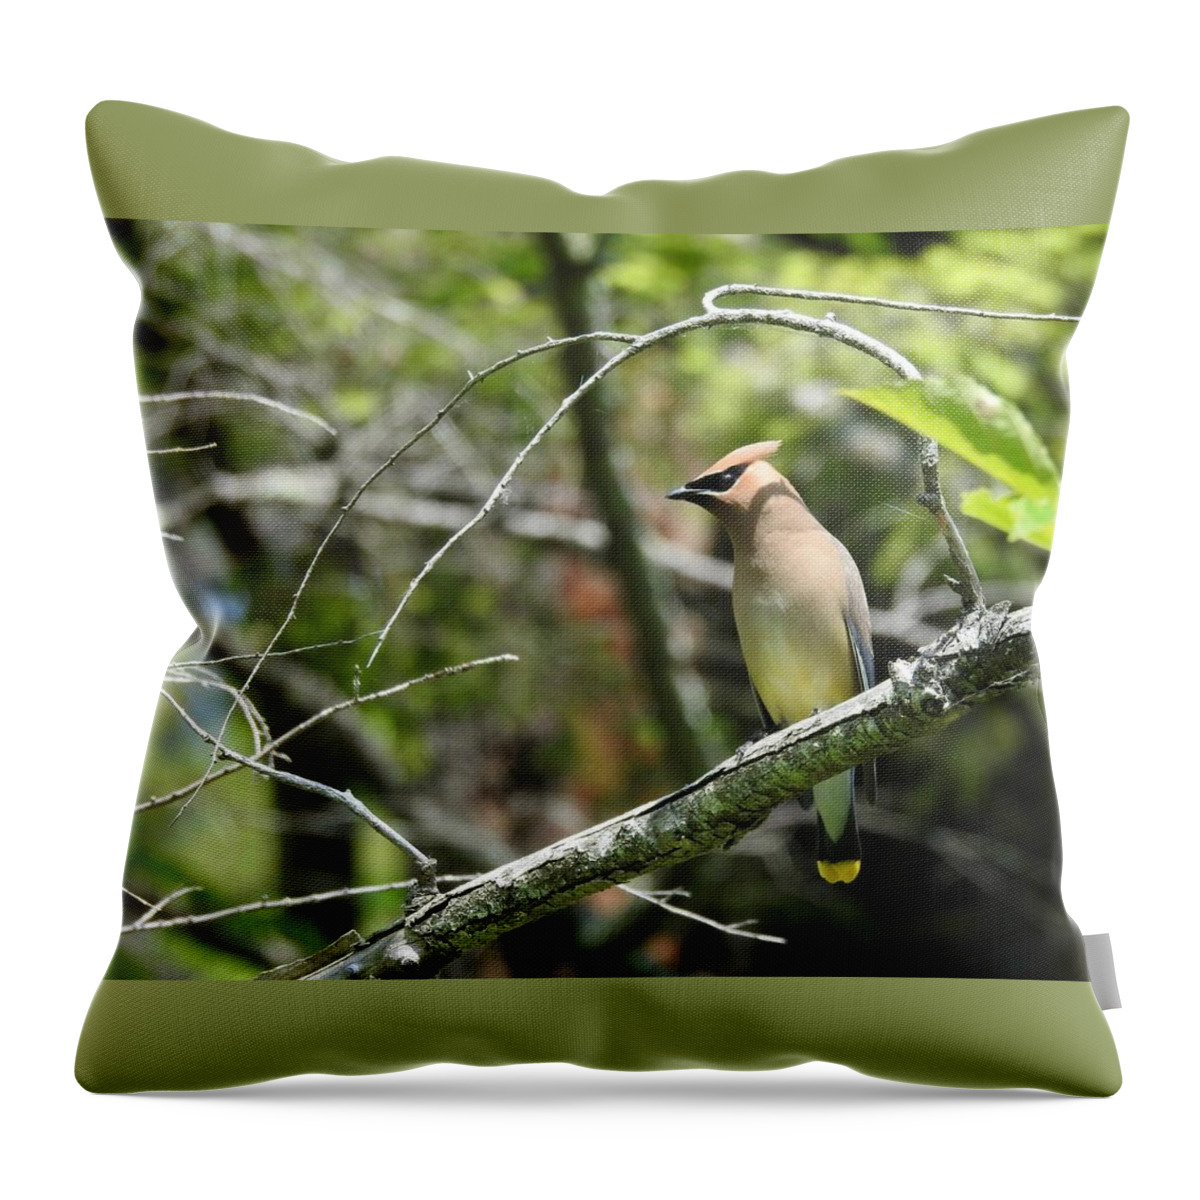 Cedar Waxwing Throw Pillow featuring the photograph Cedar Waxwing by Kathy Ozzard Chism